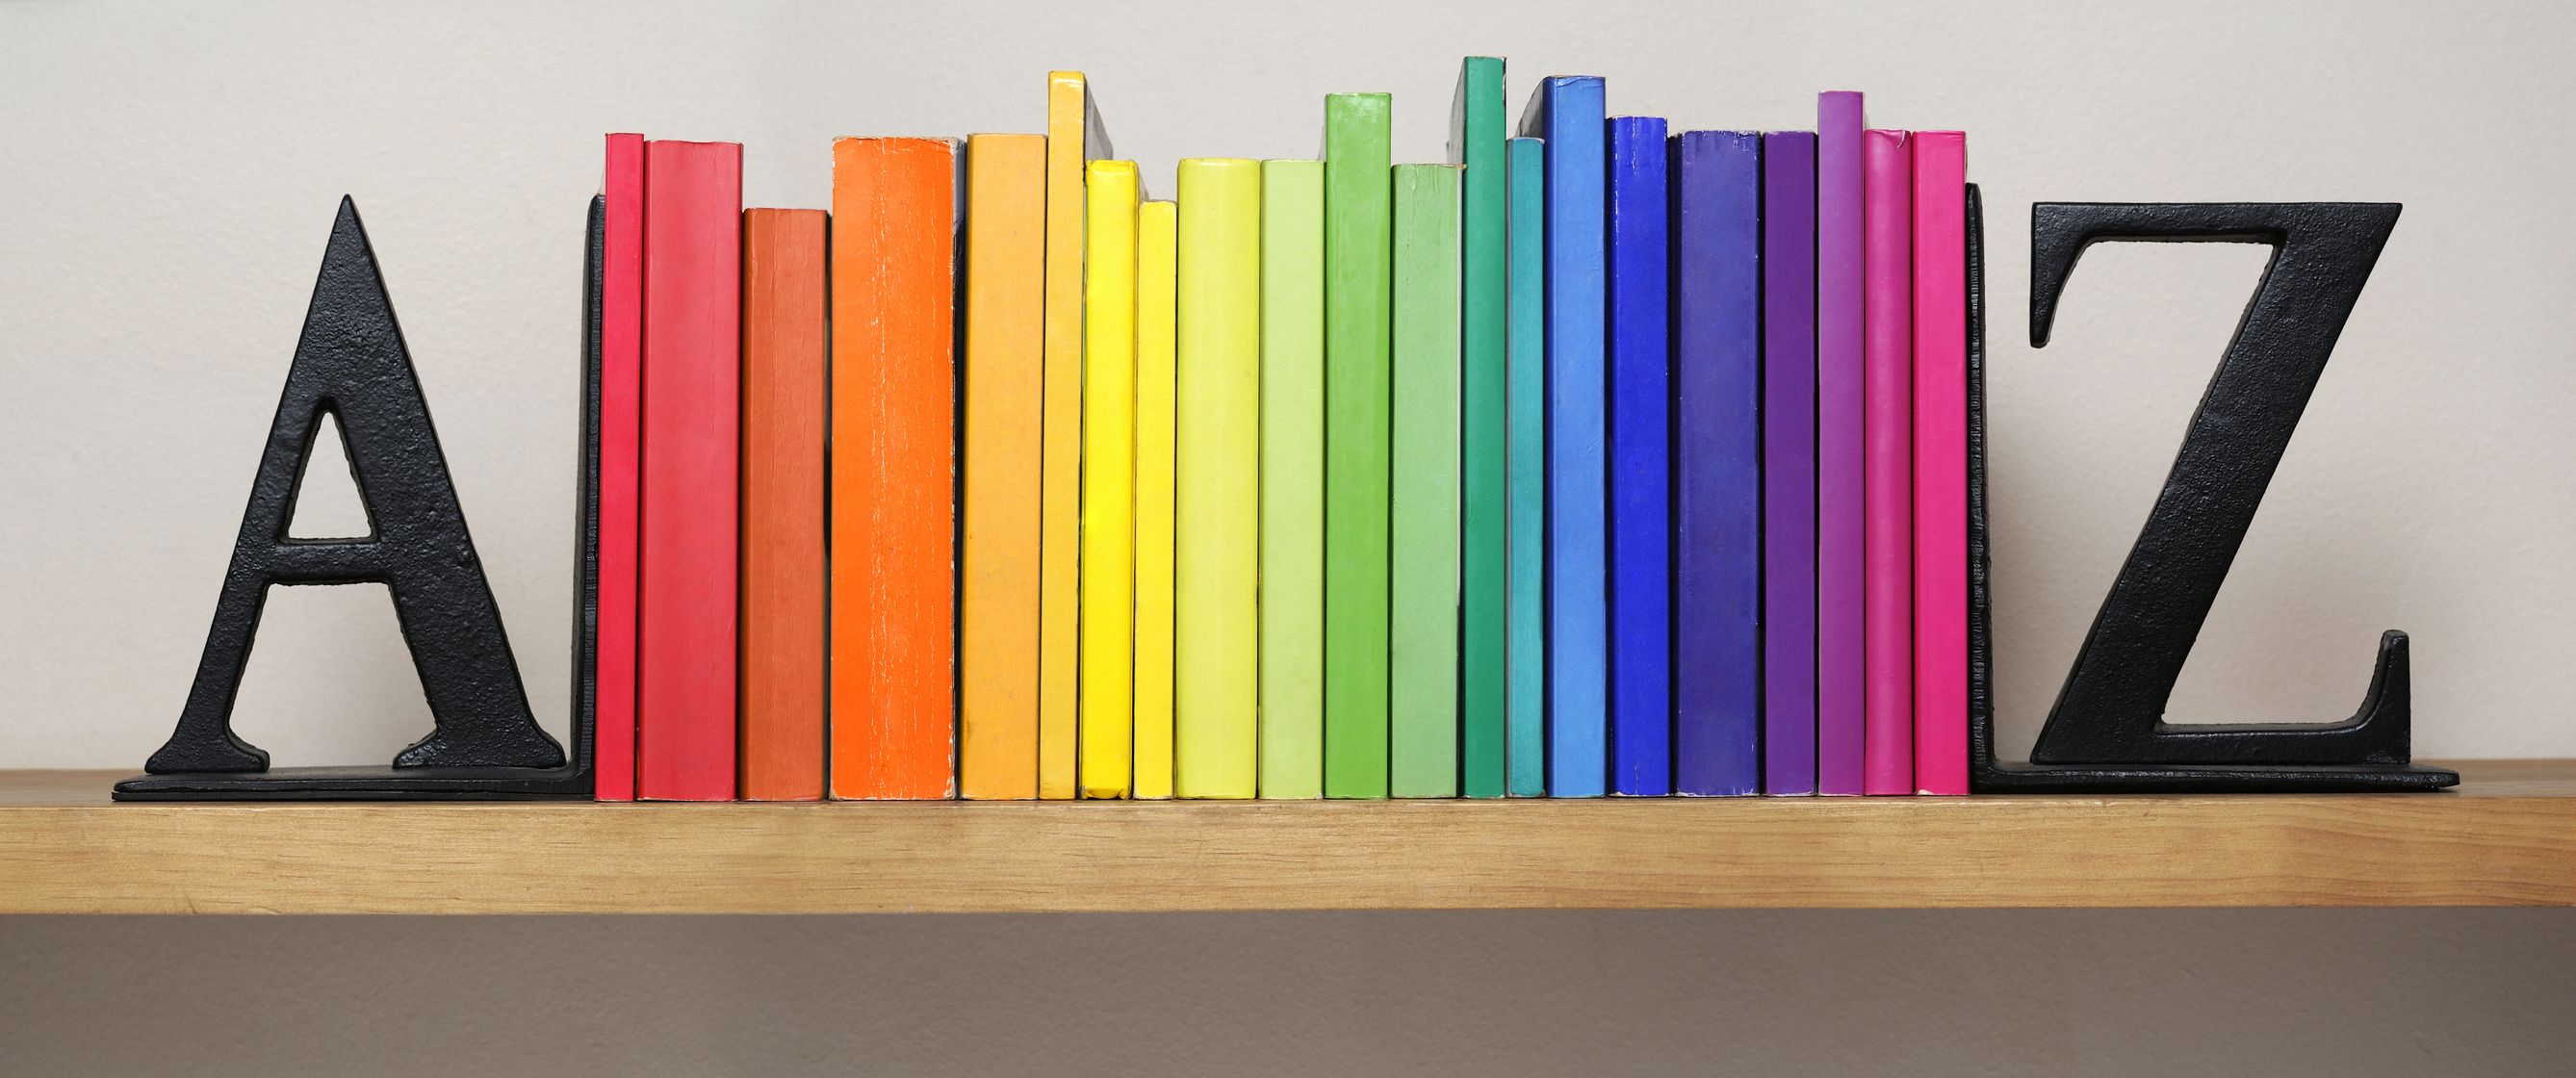 Everyone is currently obsessed with these rainbow bookshelves